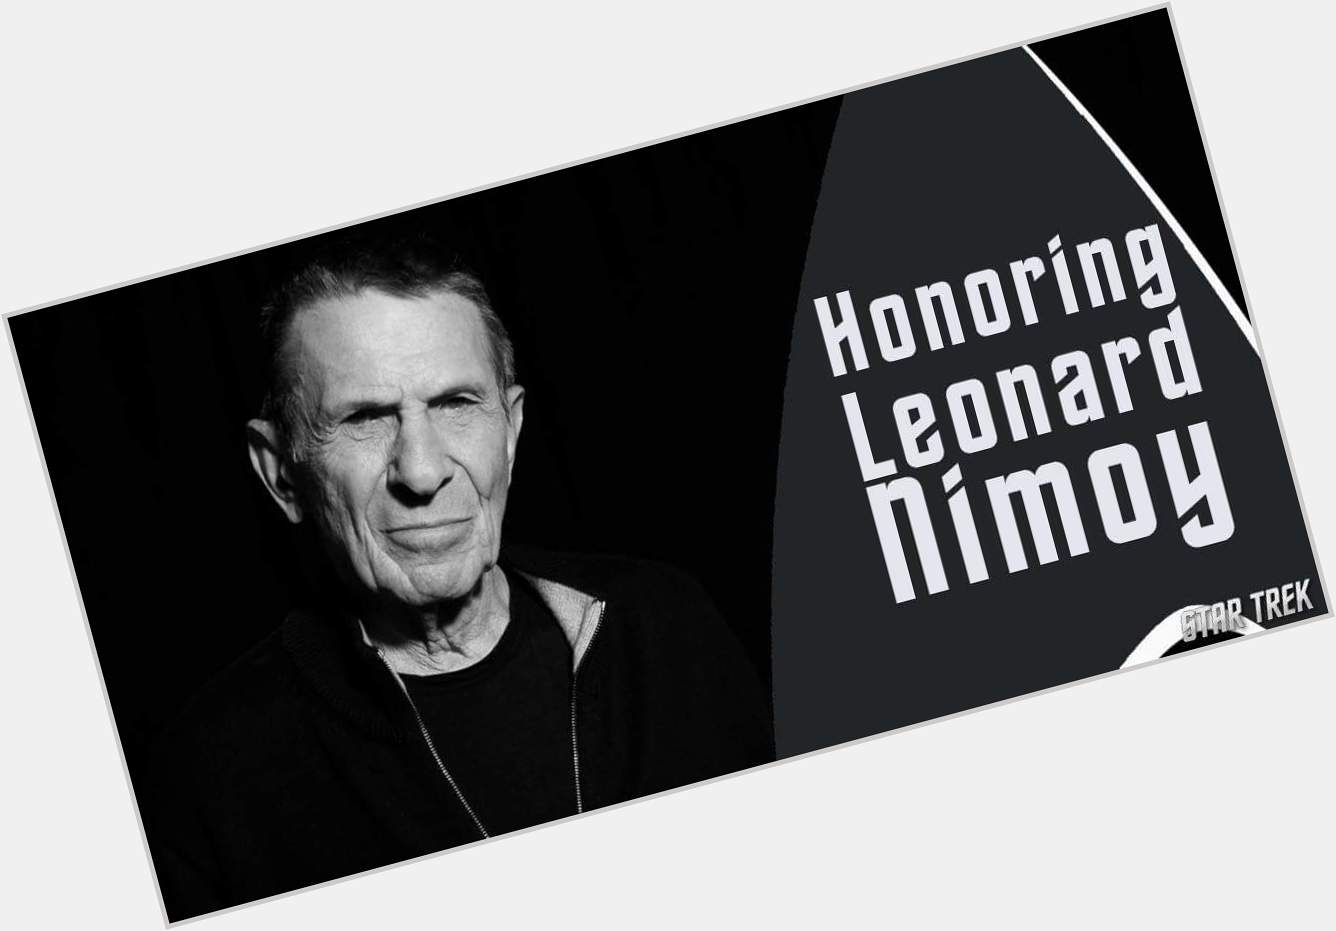   Happy Birthday Leonard Nimoy, and Although late, to also. 